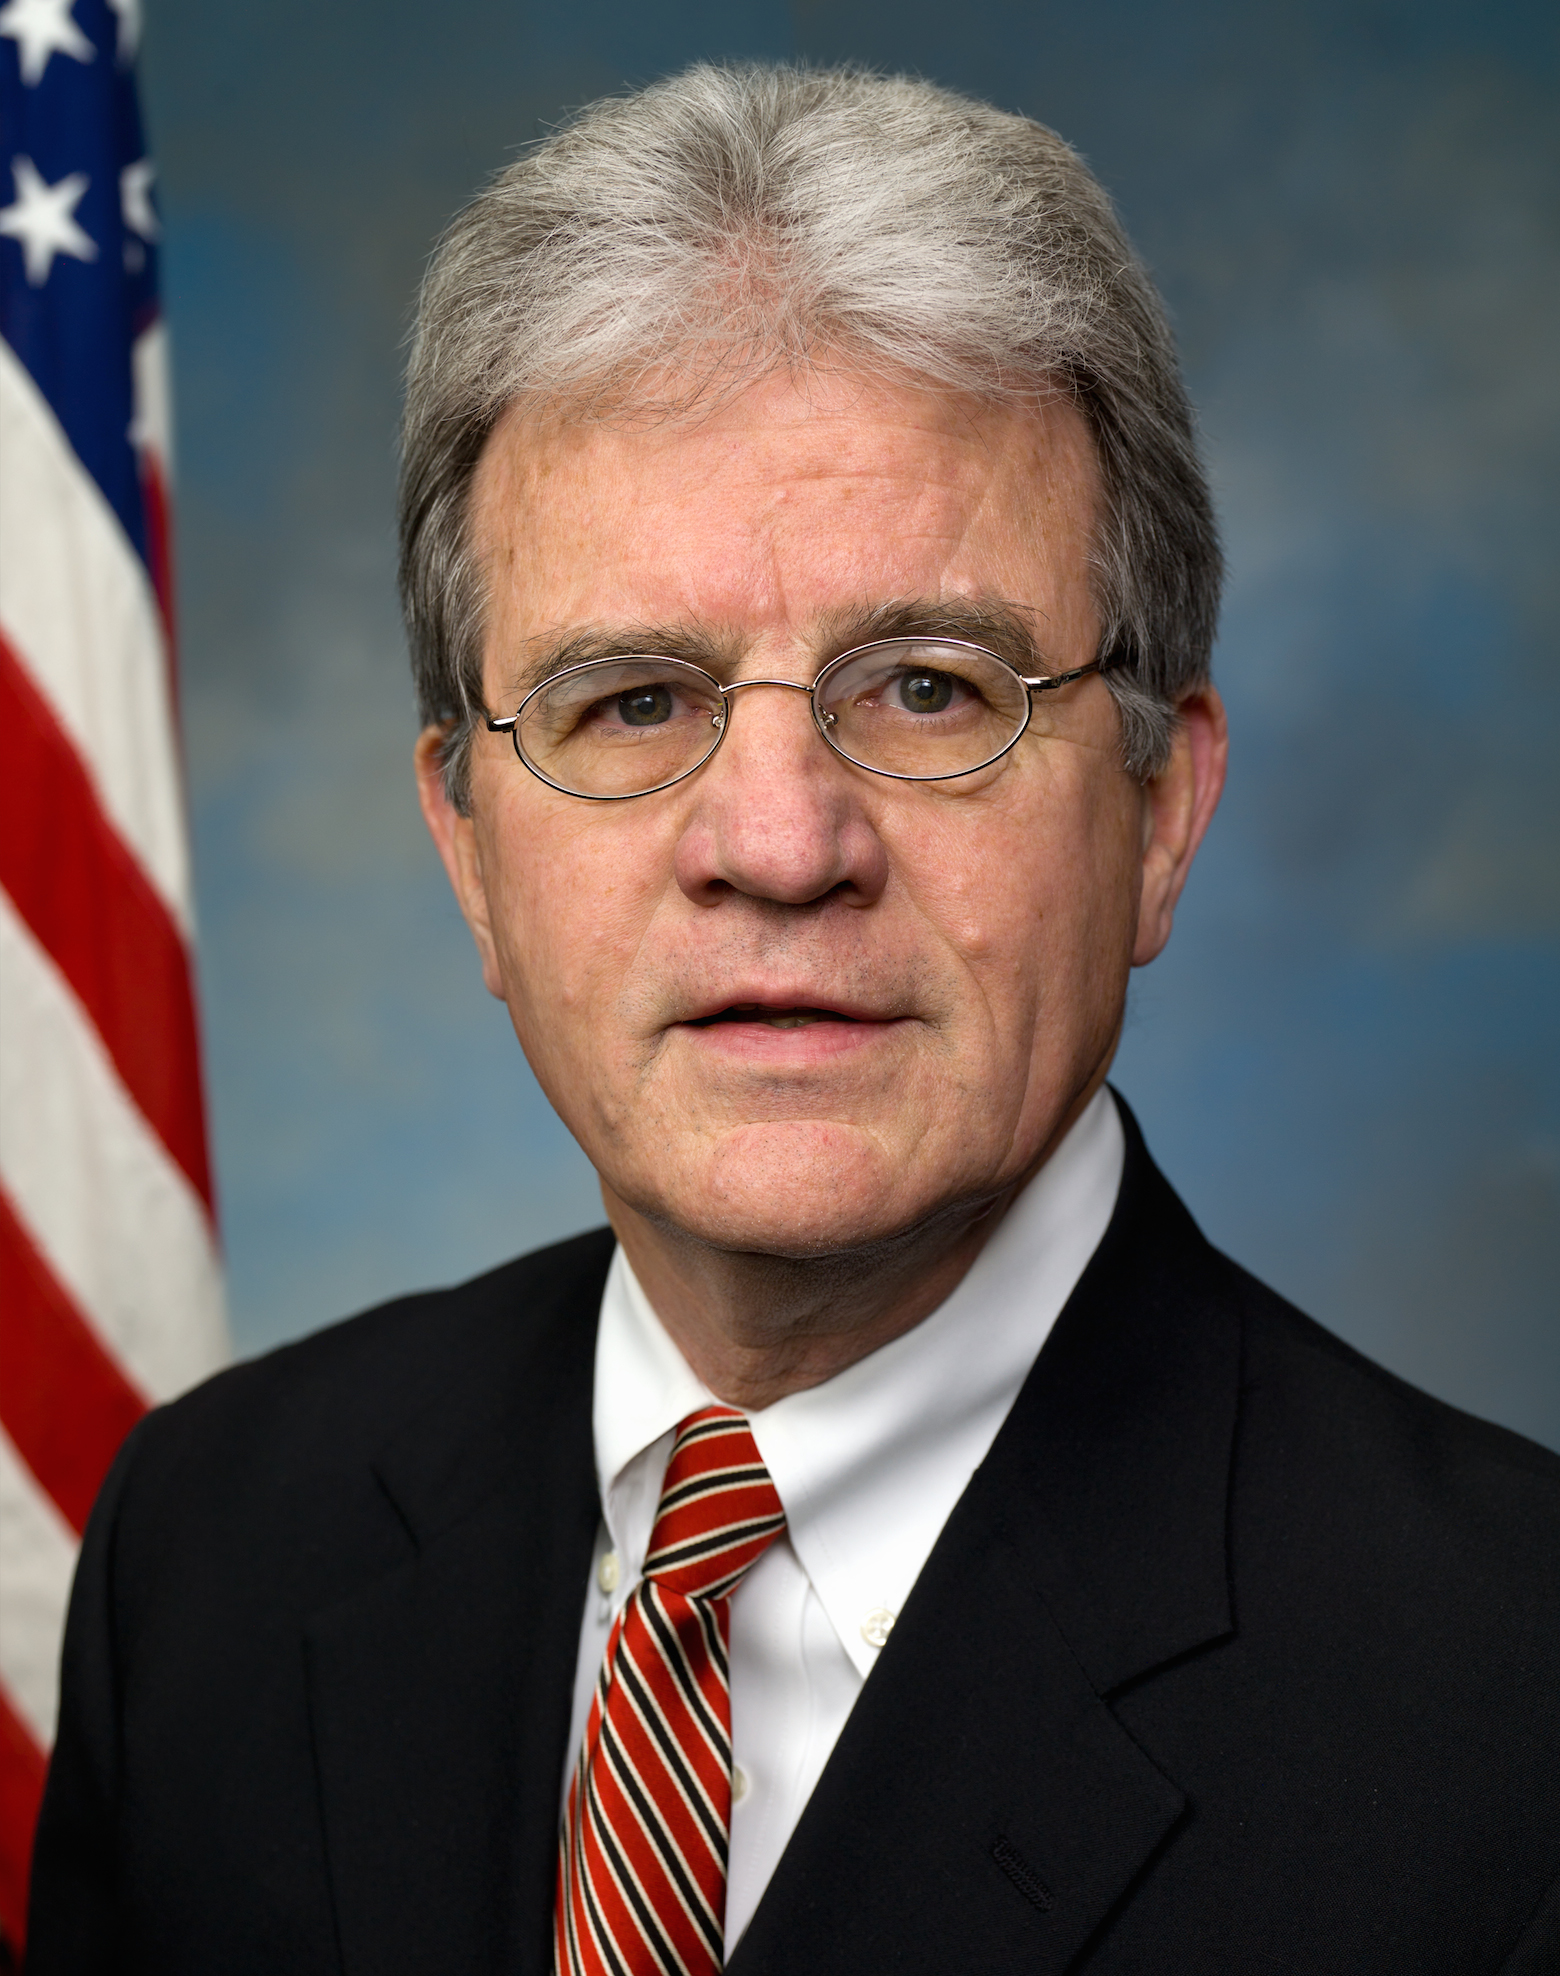 Tom Coburn to visit OCCC for town hall meeting Monday, Aug. 4